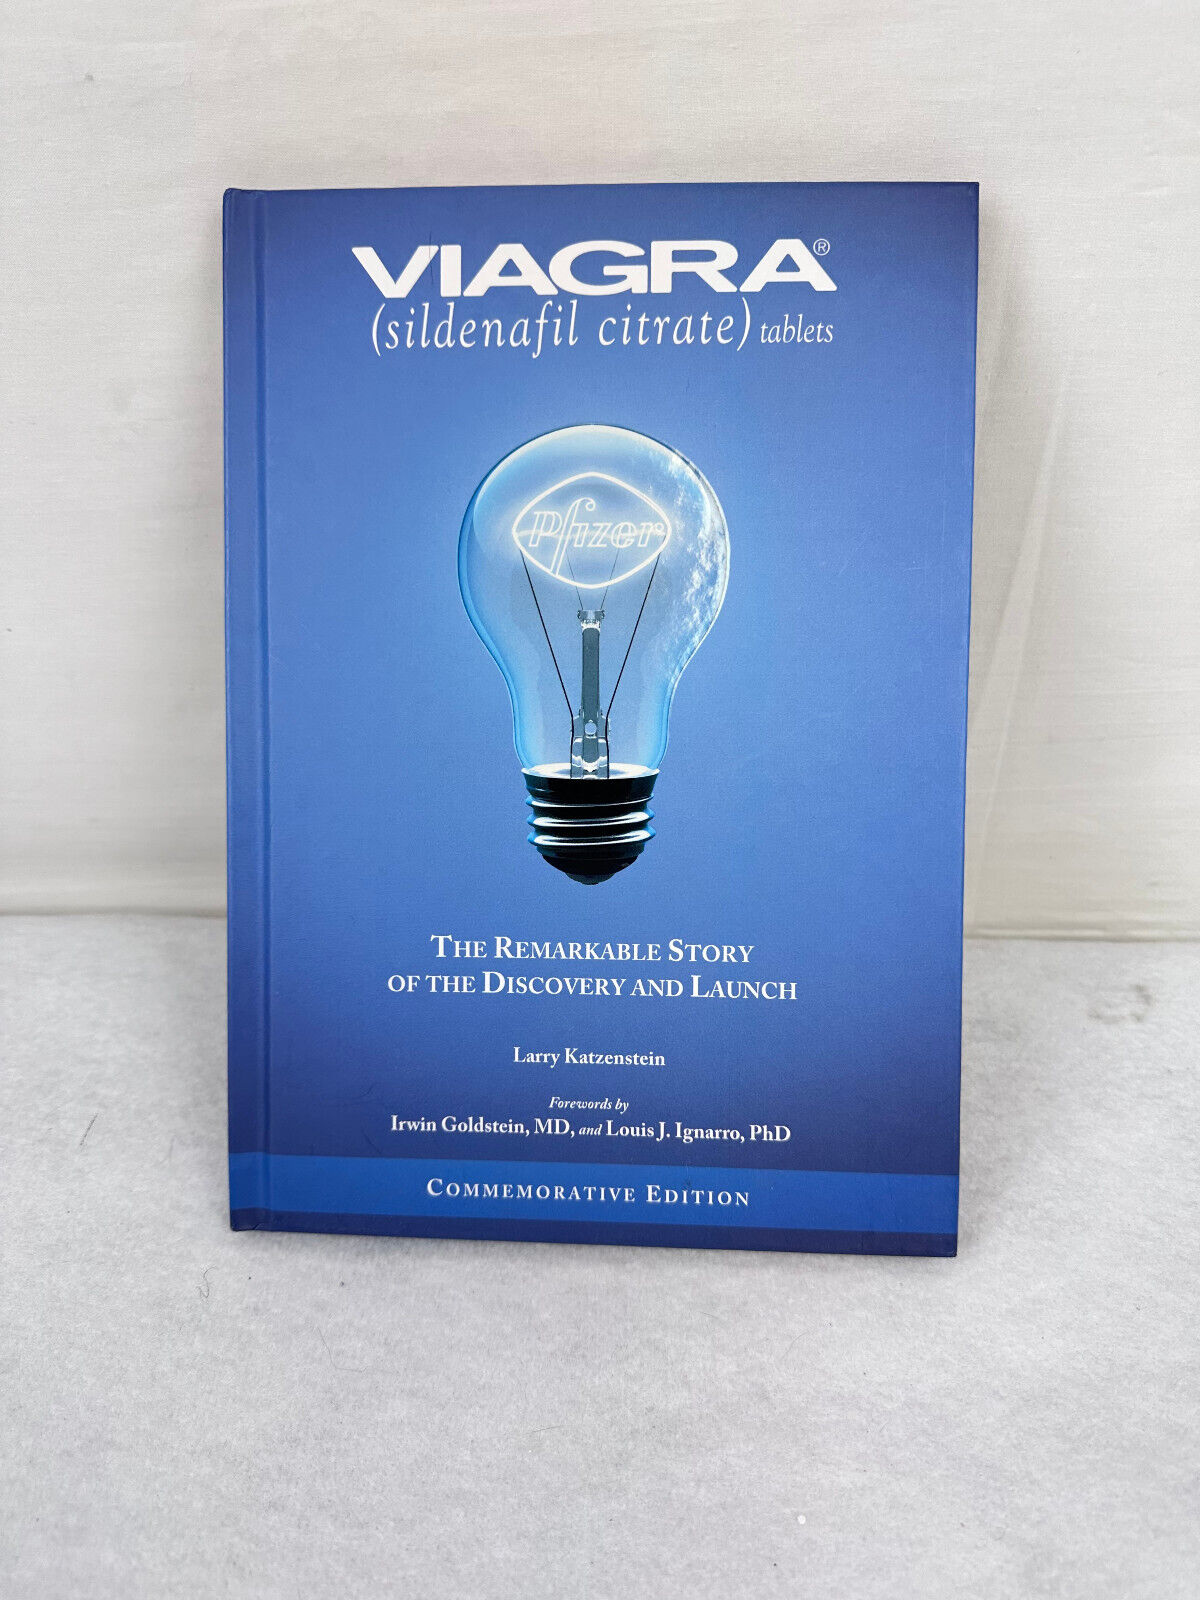 VIAGRA - THE REMARKABLE STORY OF THE DISCOVERY AND LAUNCH -COMMEMORATIVE EDITION